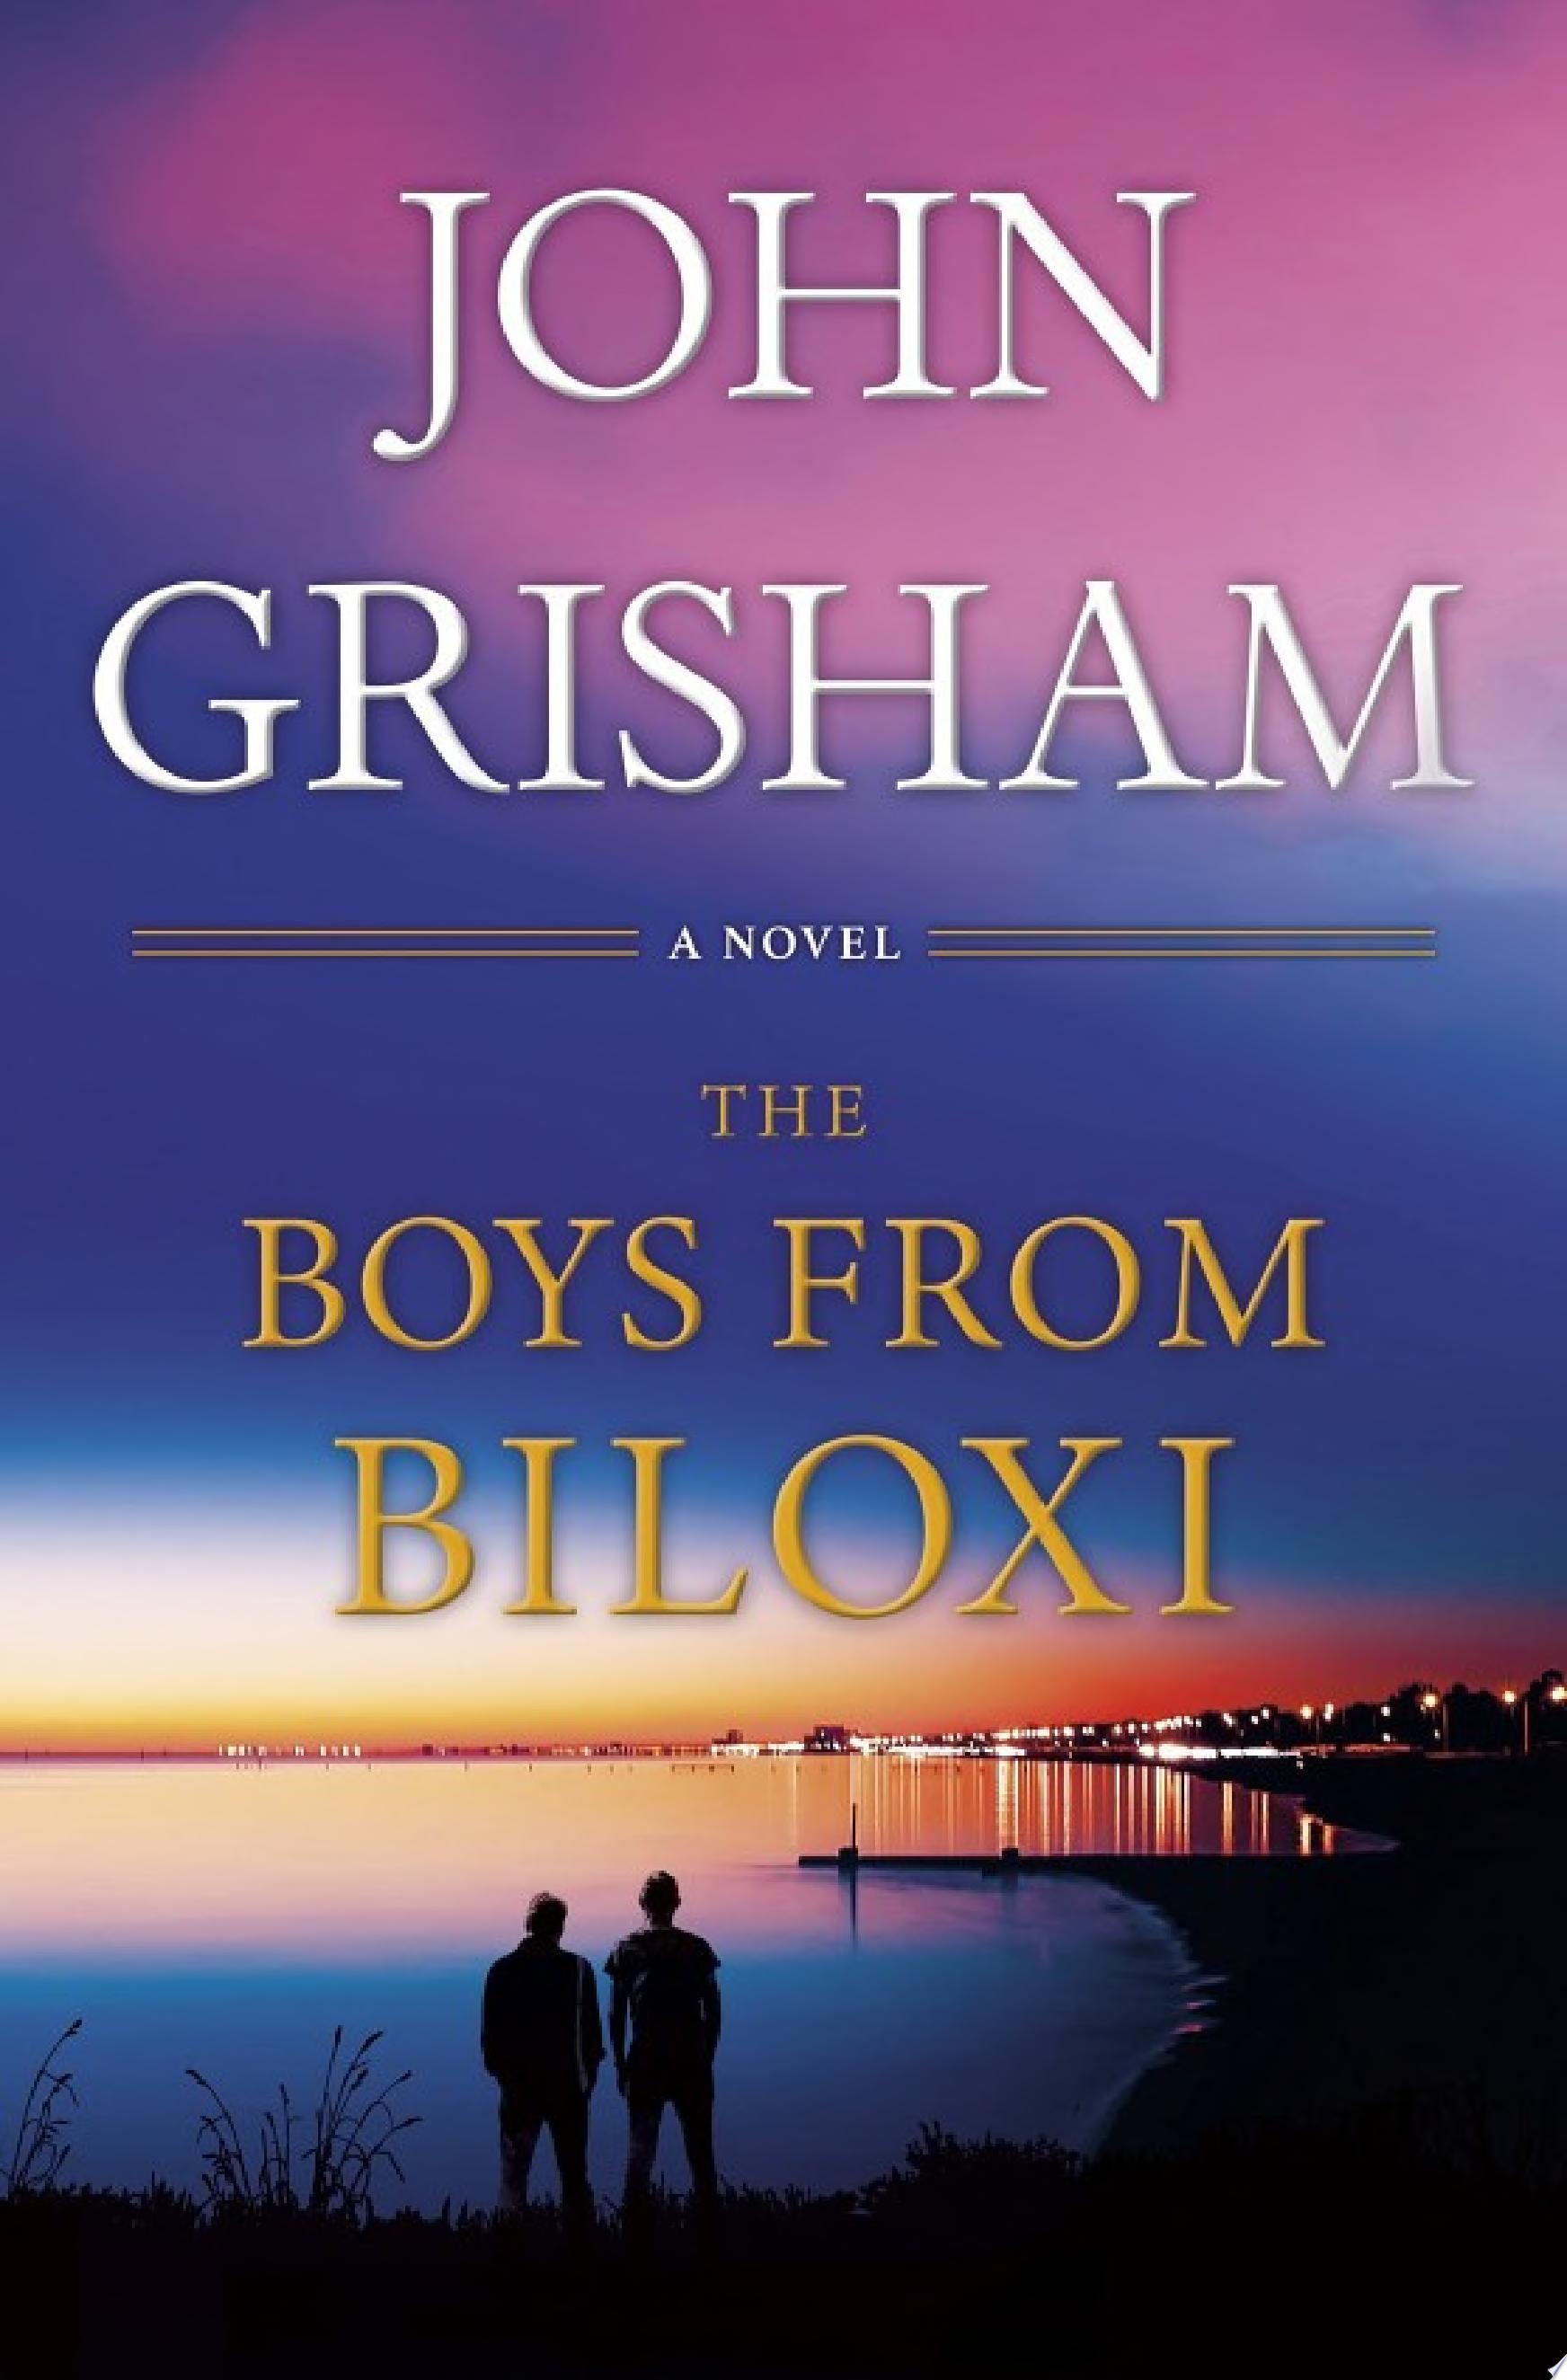 Image for "The Boys from Biloxi"